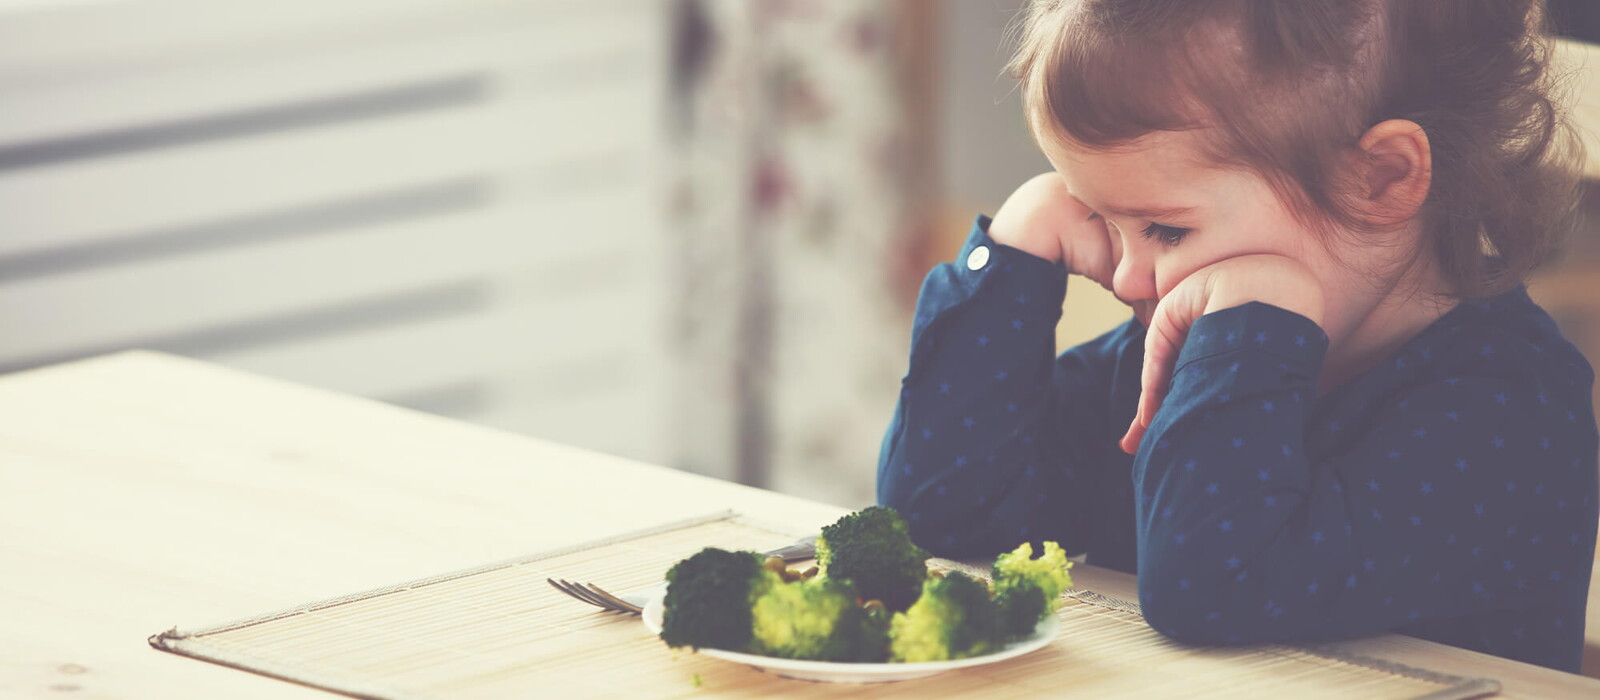 Your preschoolers are unpredictable and inconsistent, and their eating habits change on a daily basis. 